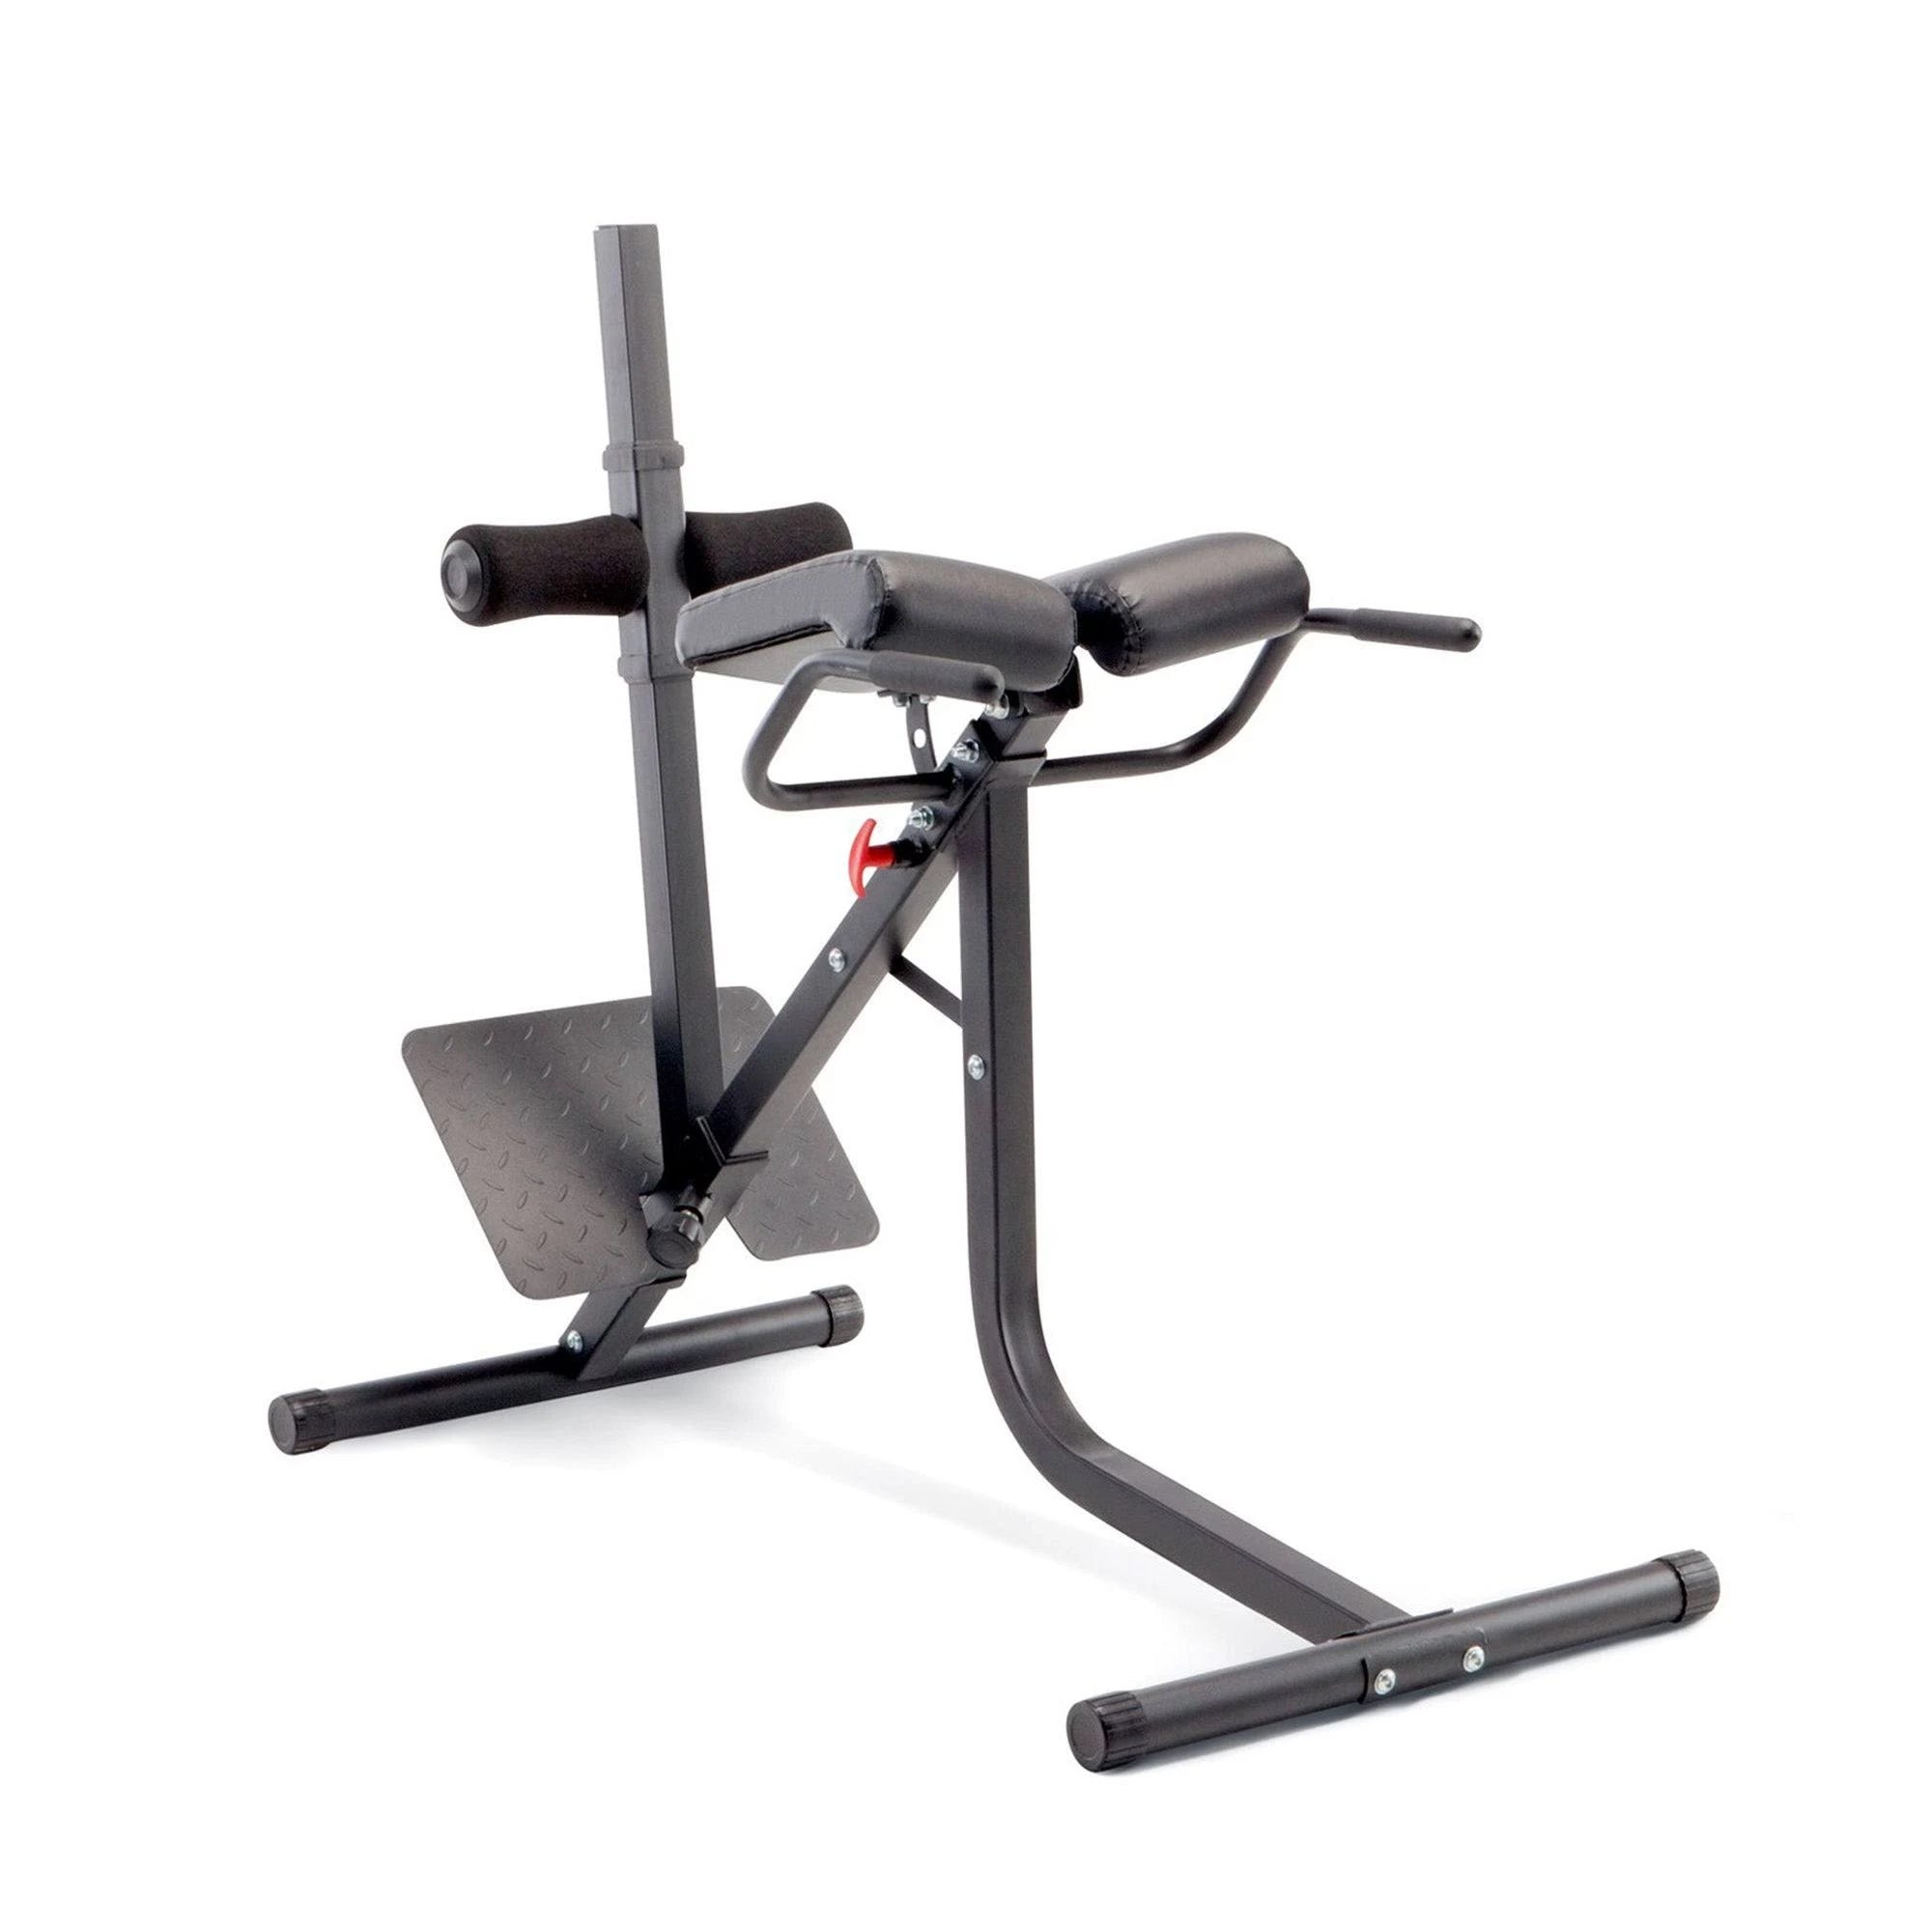 Marcy Pro JD-5481 Deluxe Steel Frame Hyper Extension Bench for Racks & Home Gyms | Image